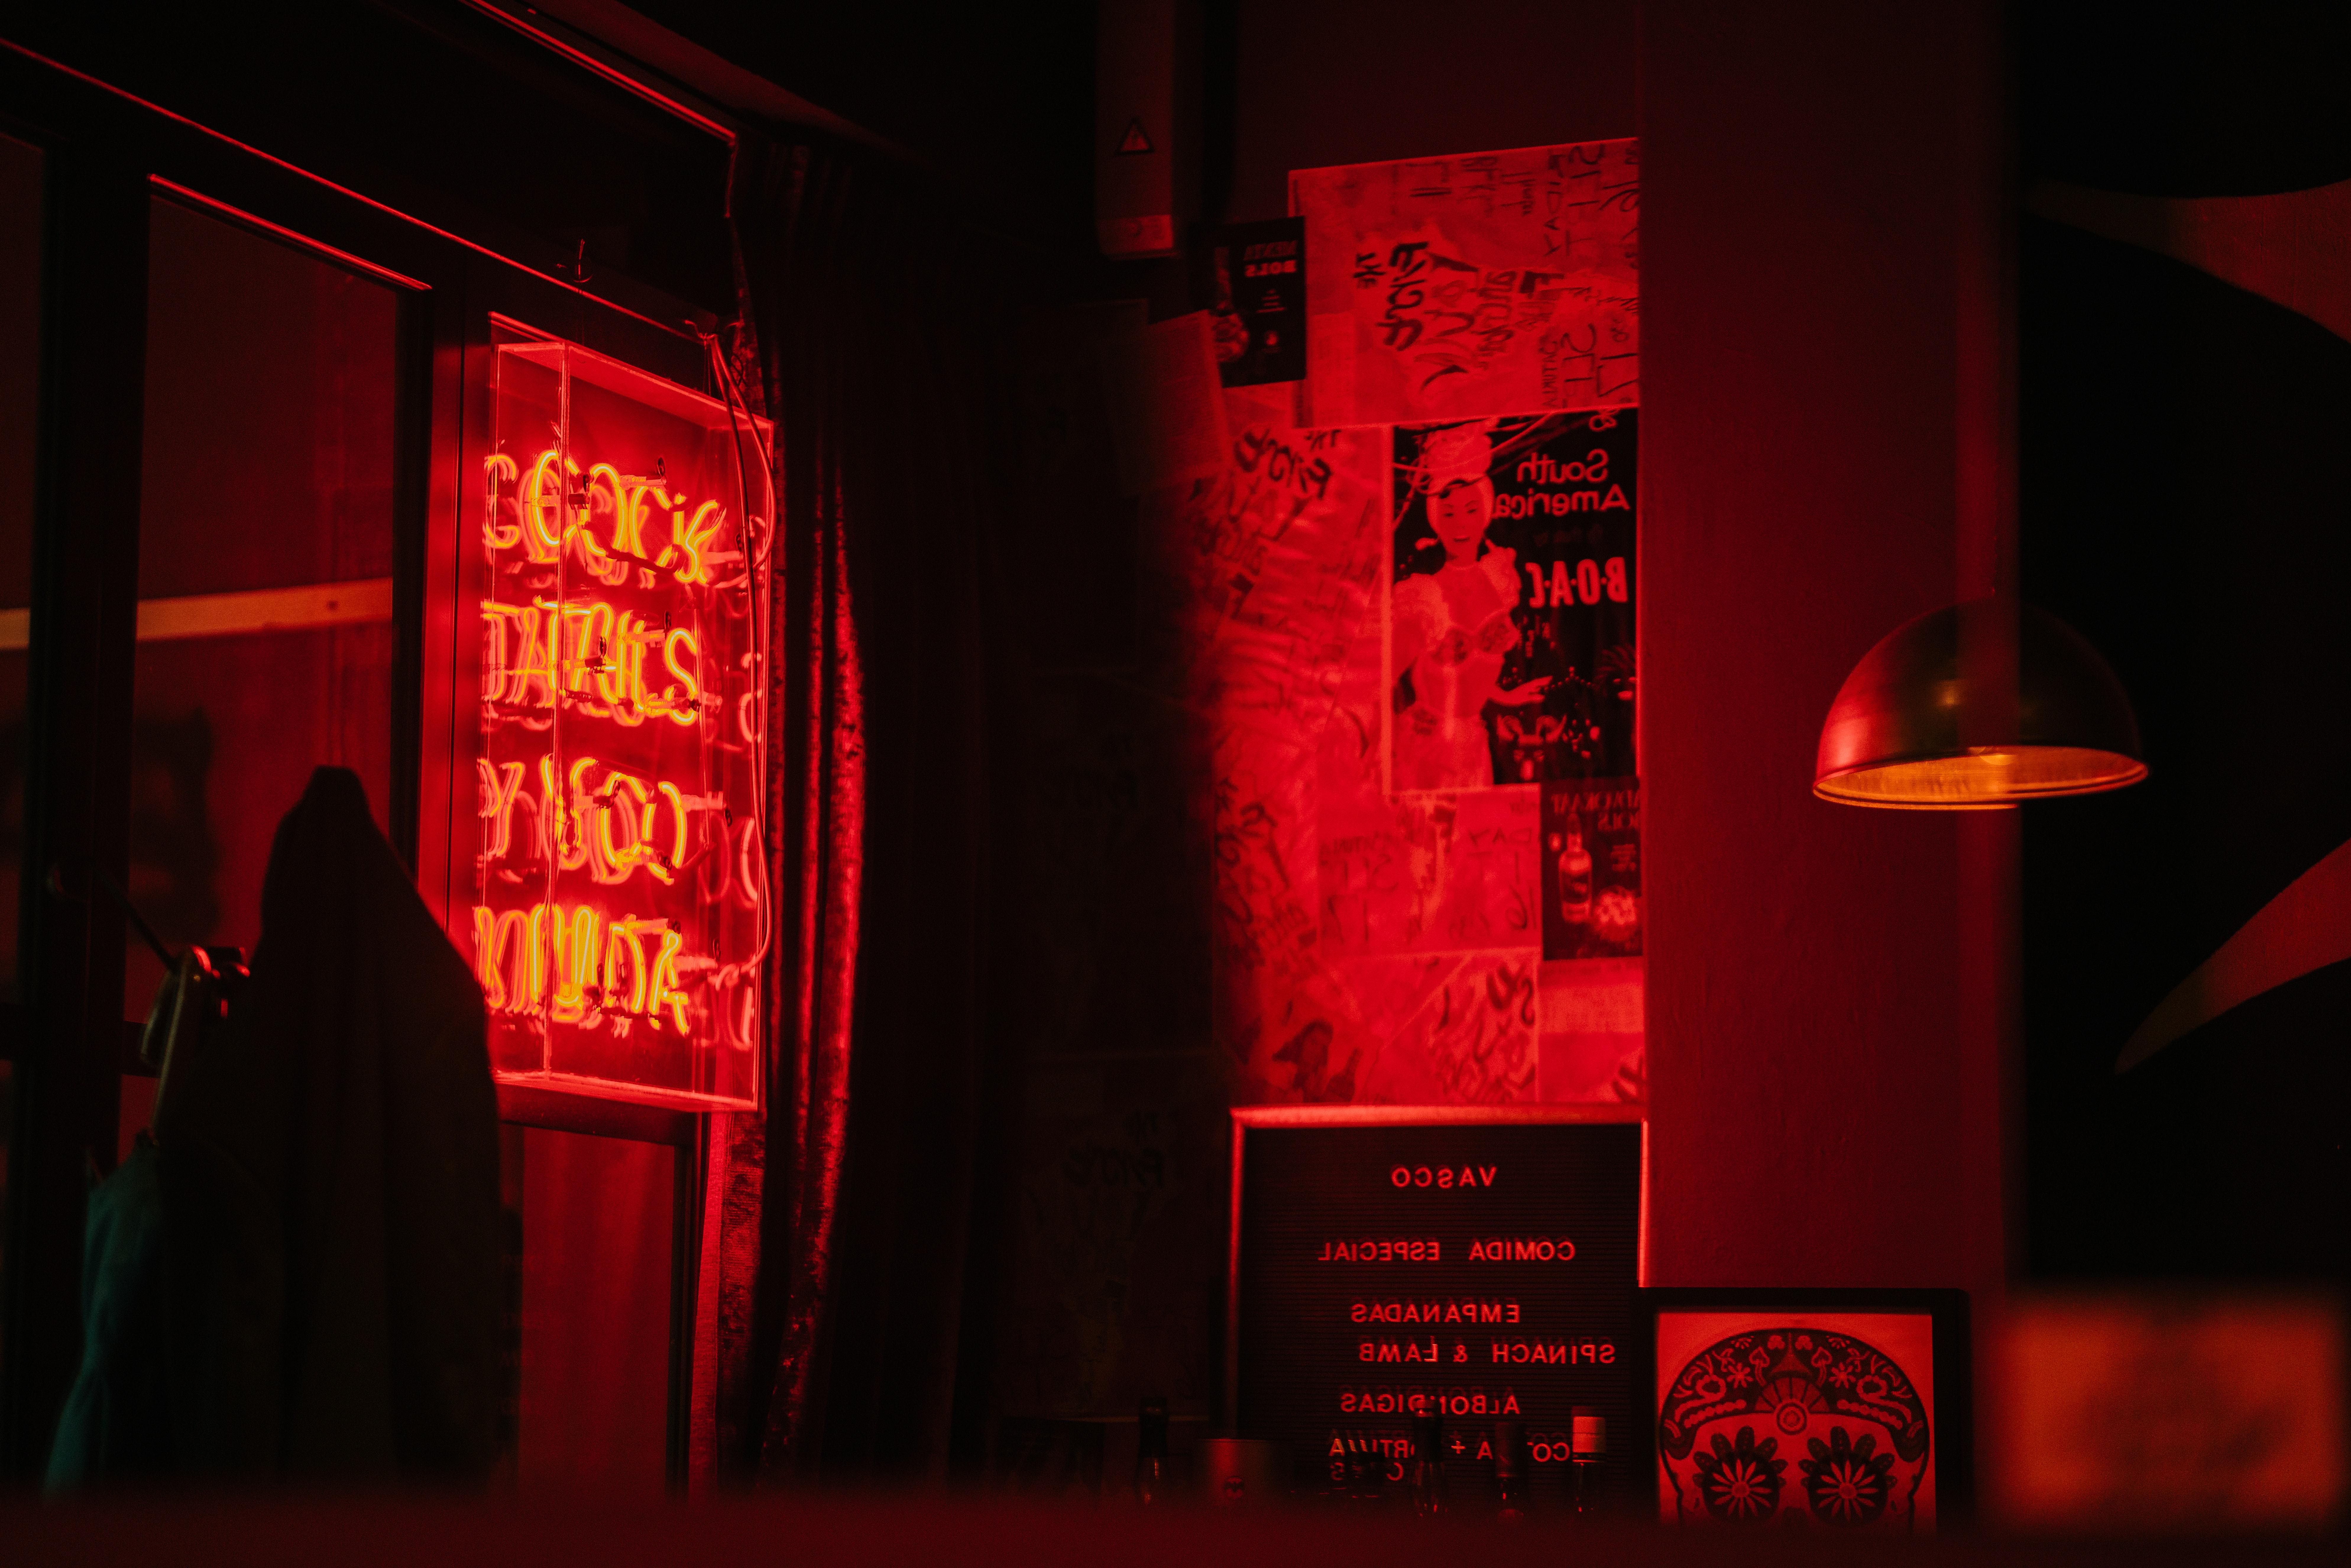 A red neon sign is lit up in a dark room. - Dark red, neon red